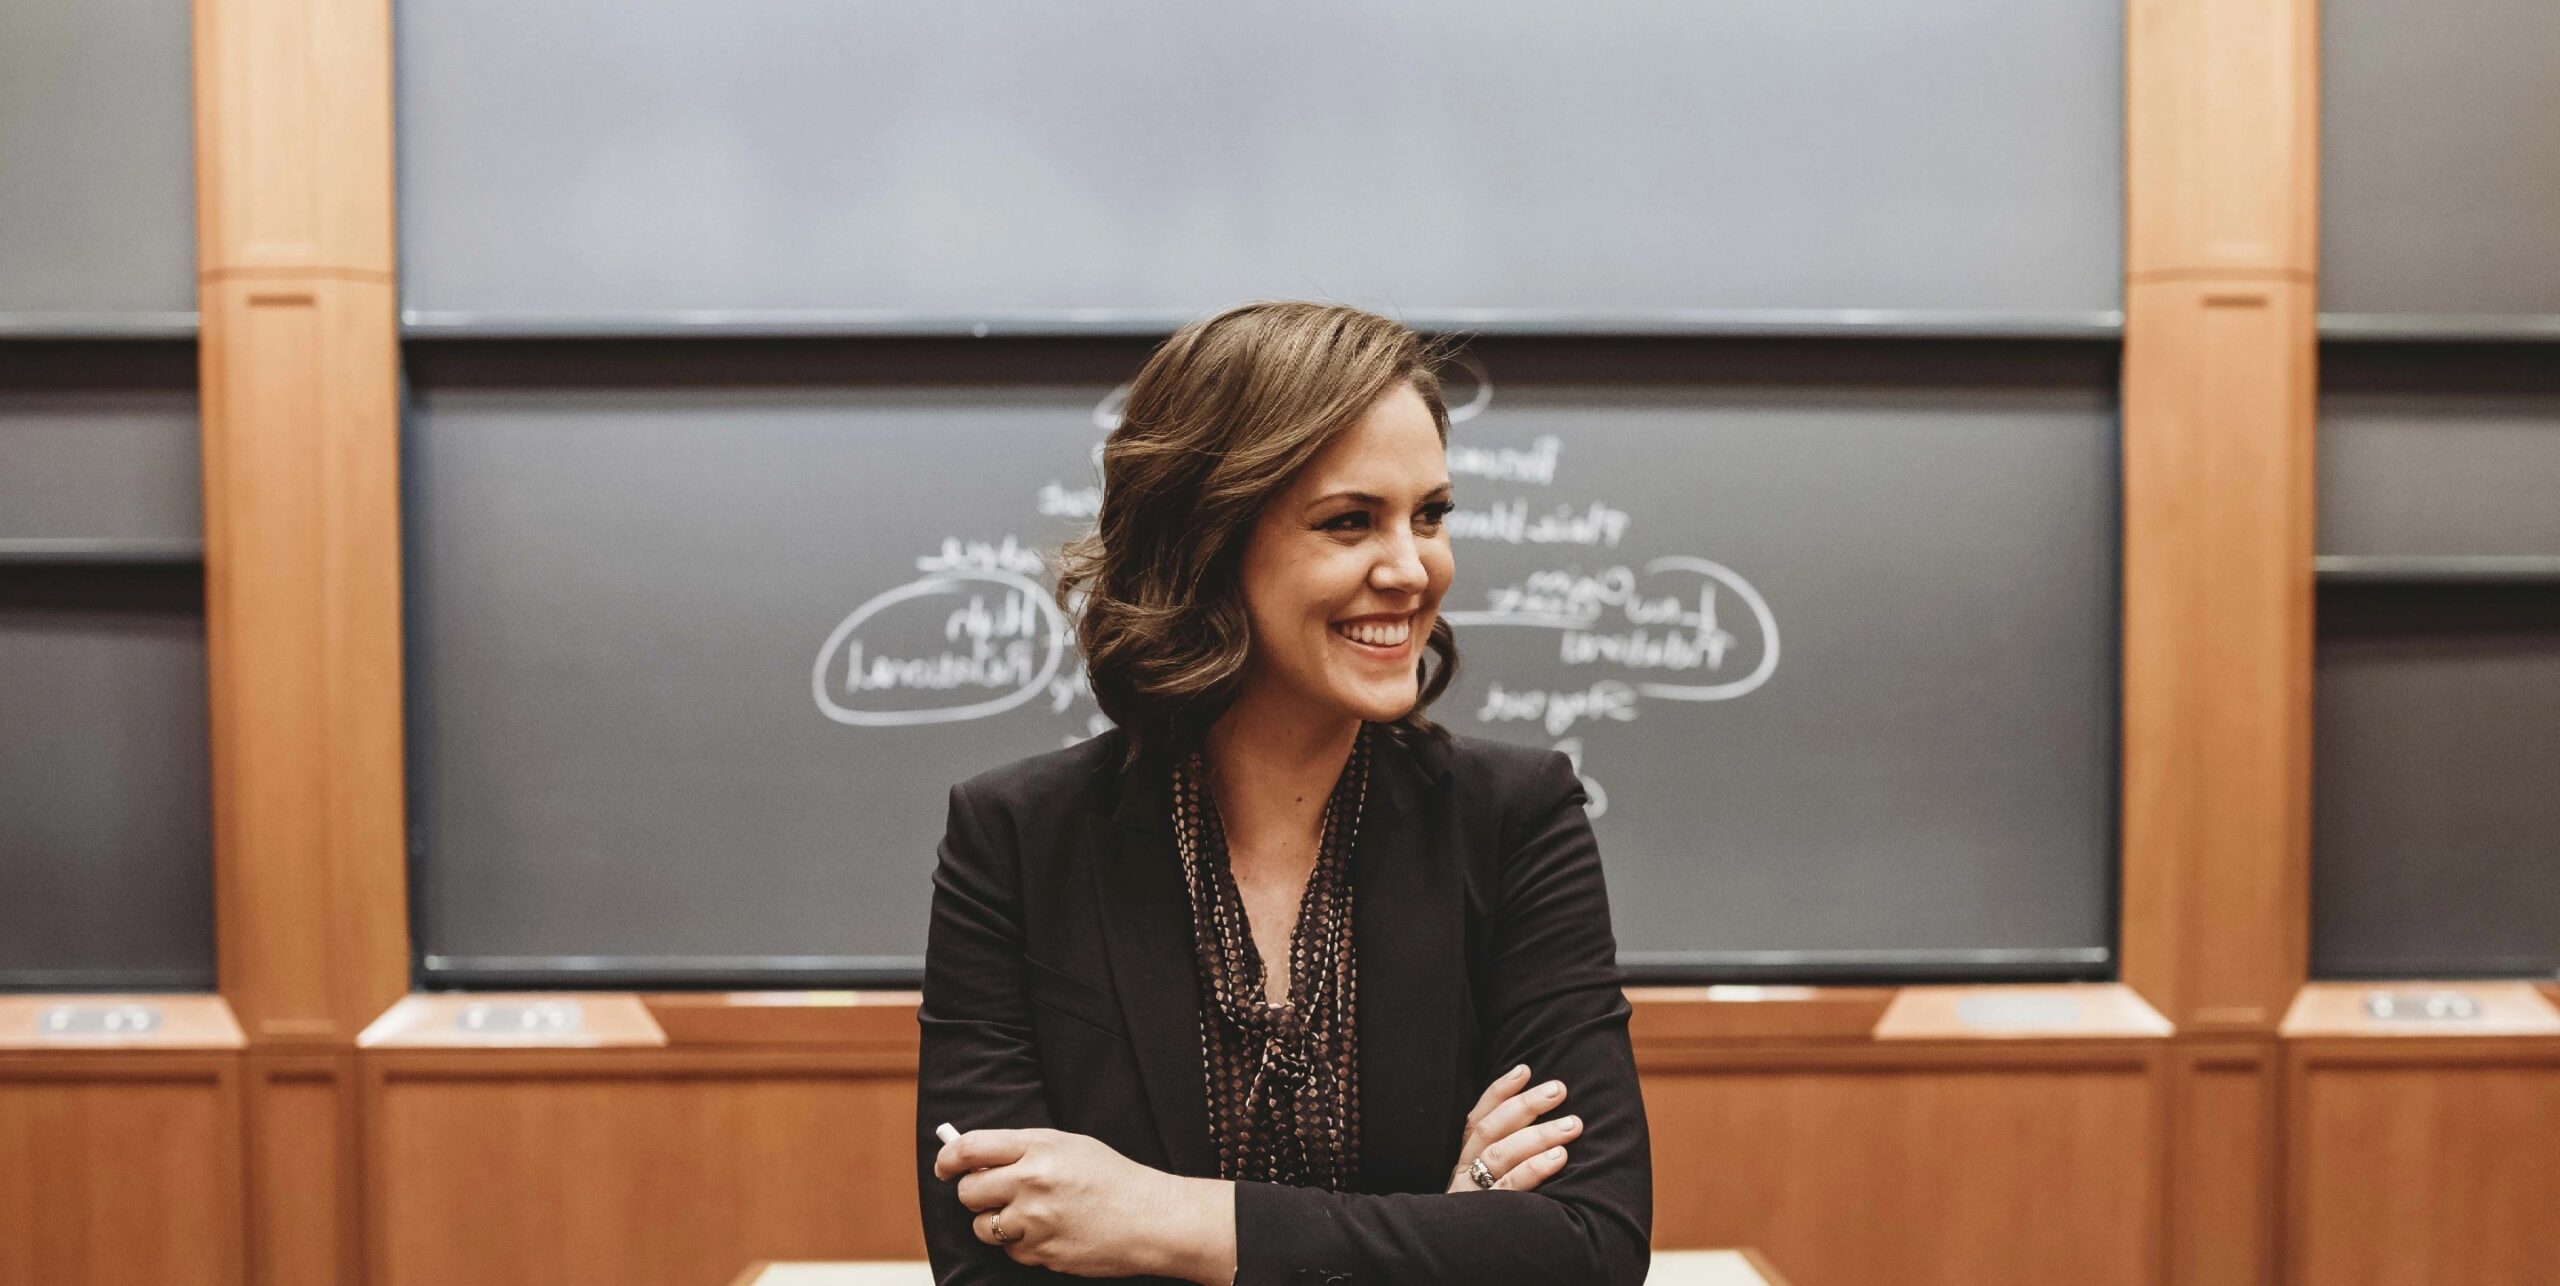 behavioral research scientist Alison Wood Brooks in front of a chalkboard